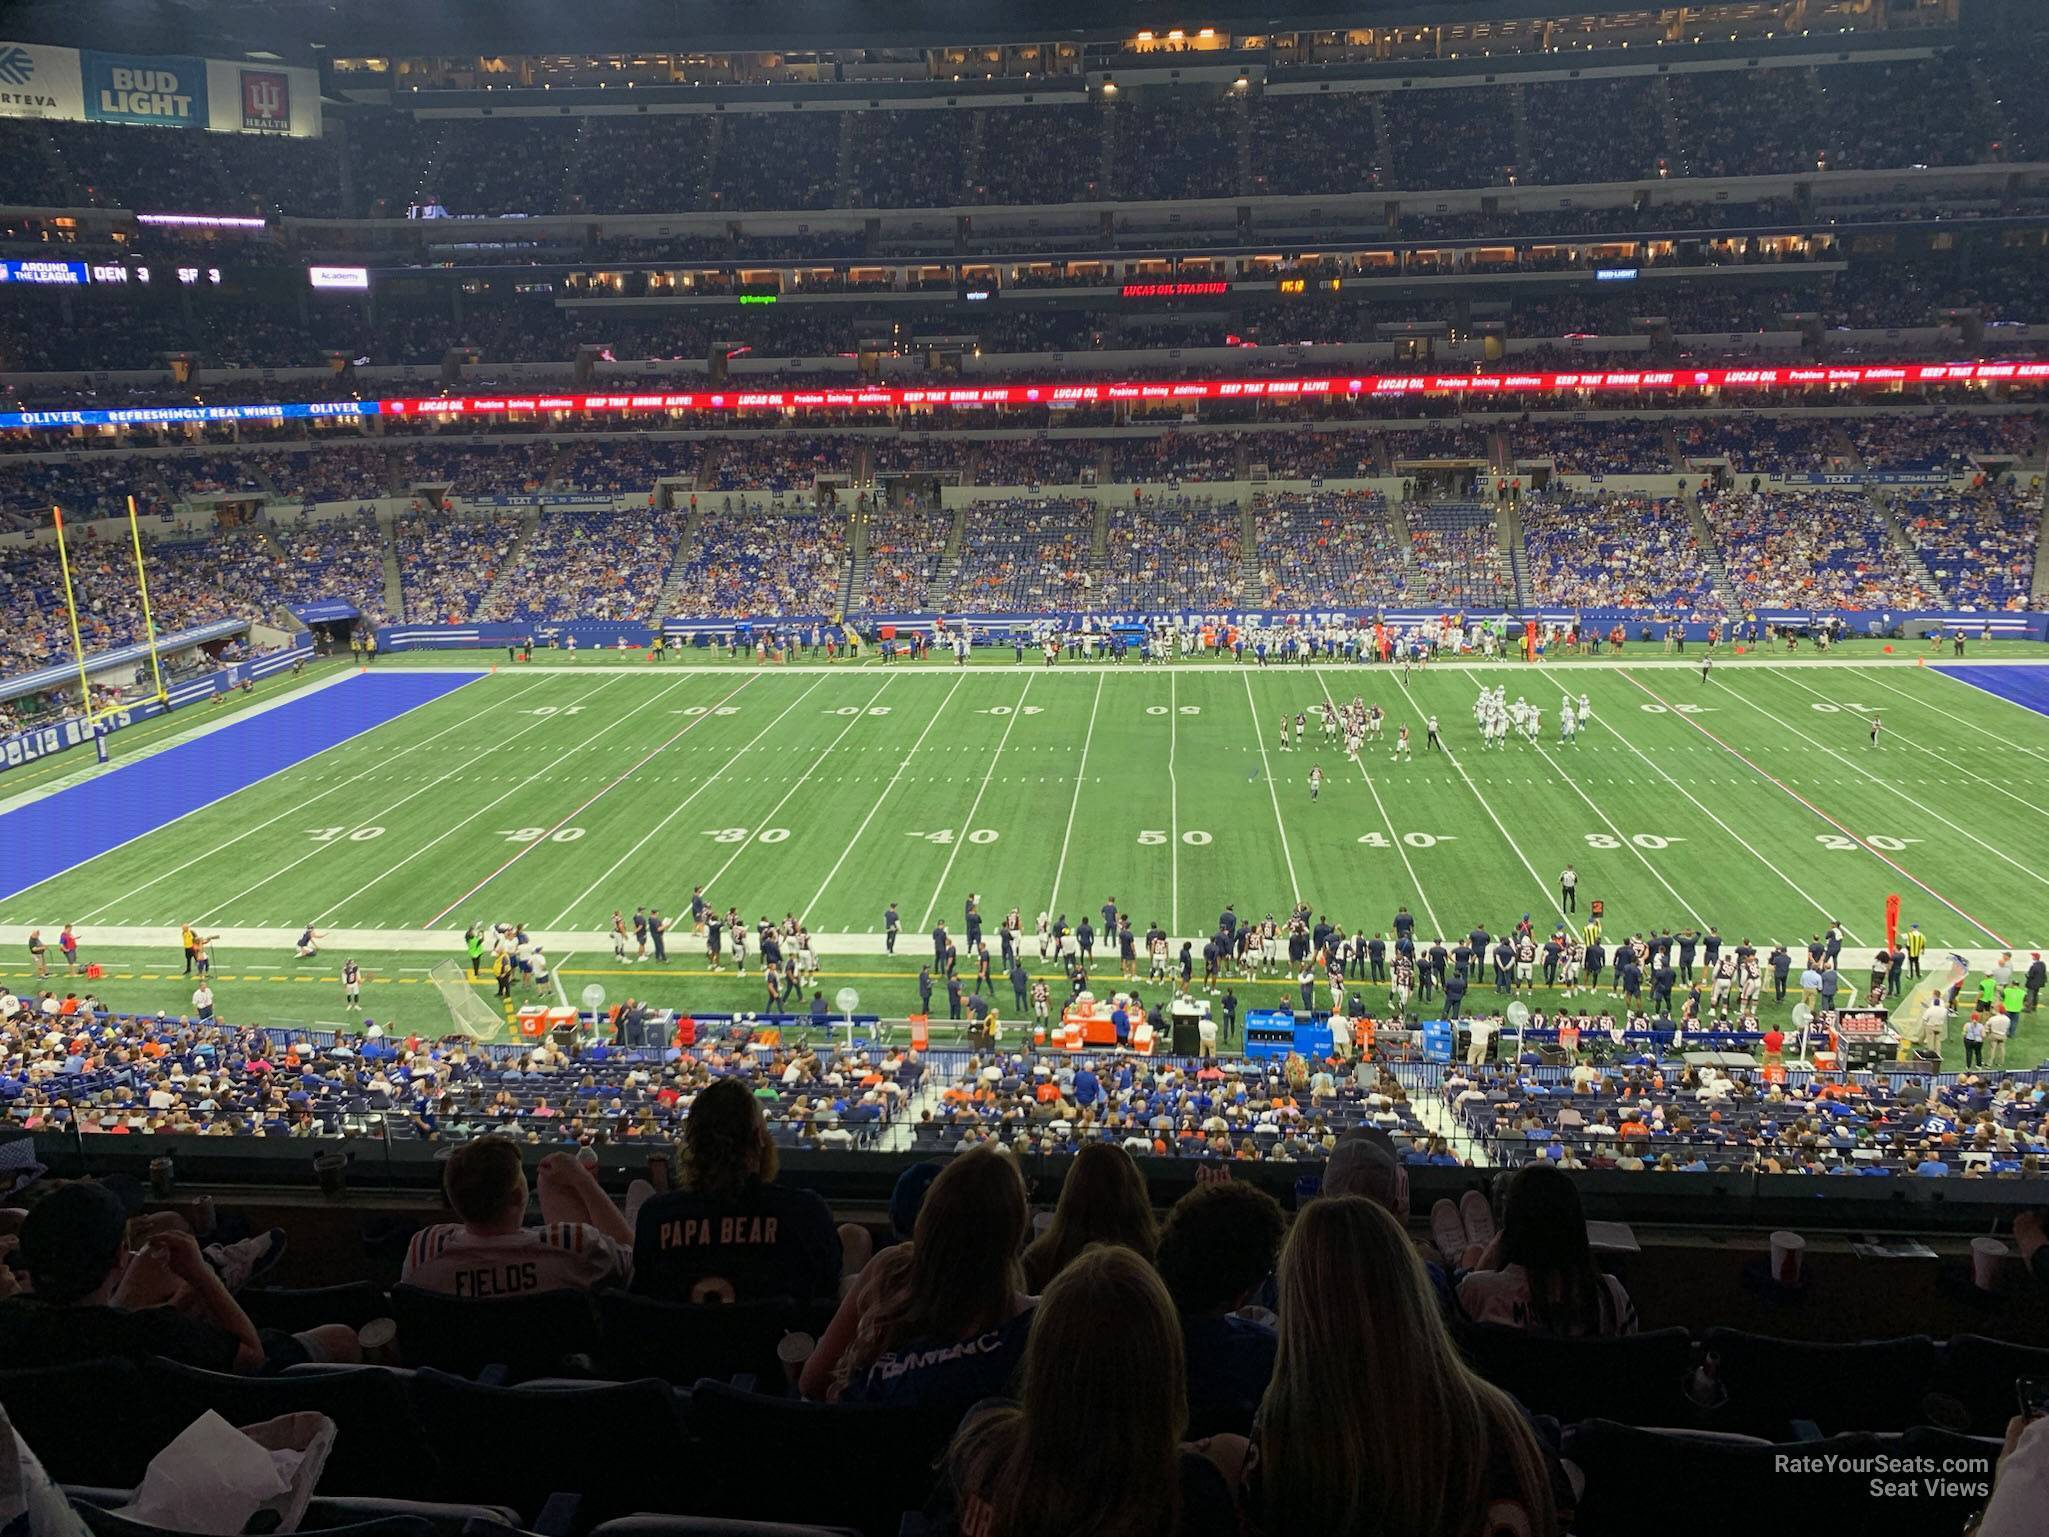 section 313, row last (2) seat view  for football - lucas oil stadium